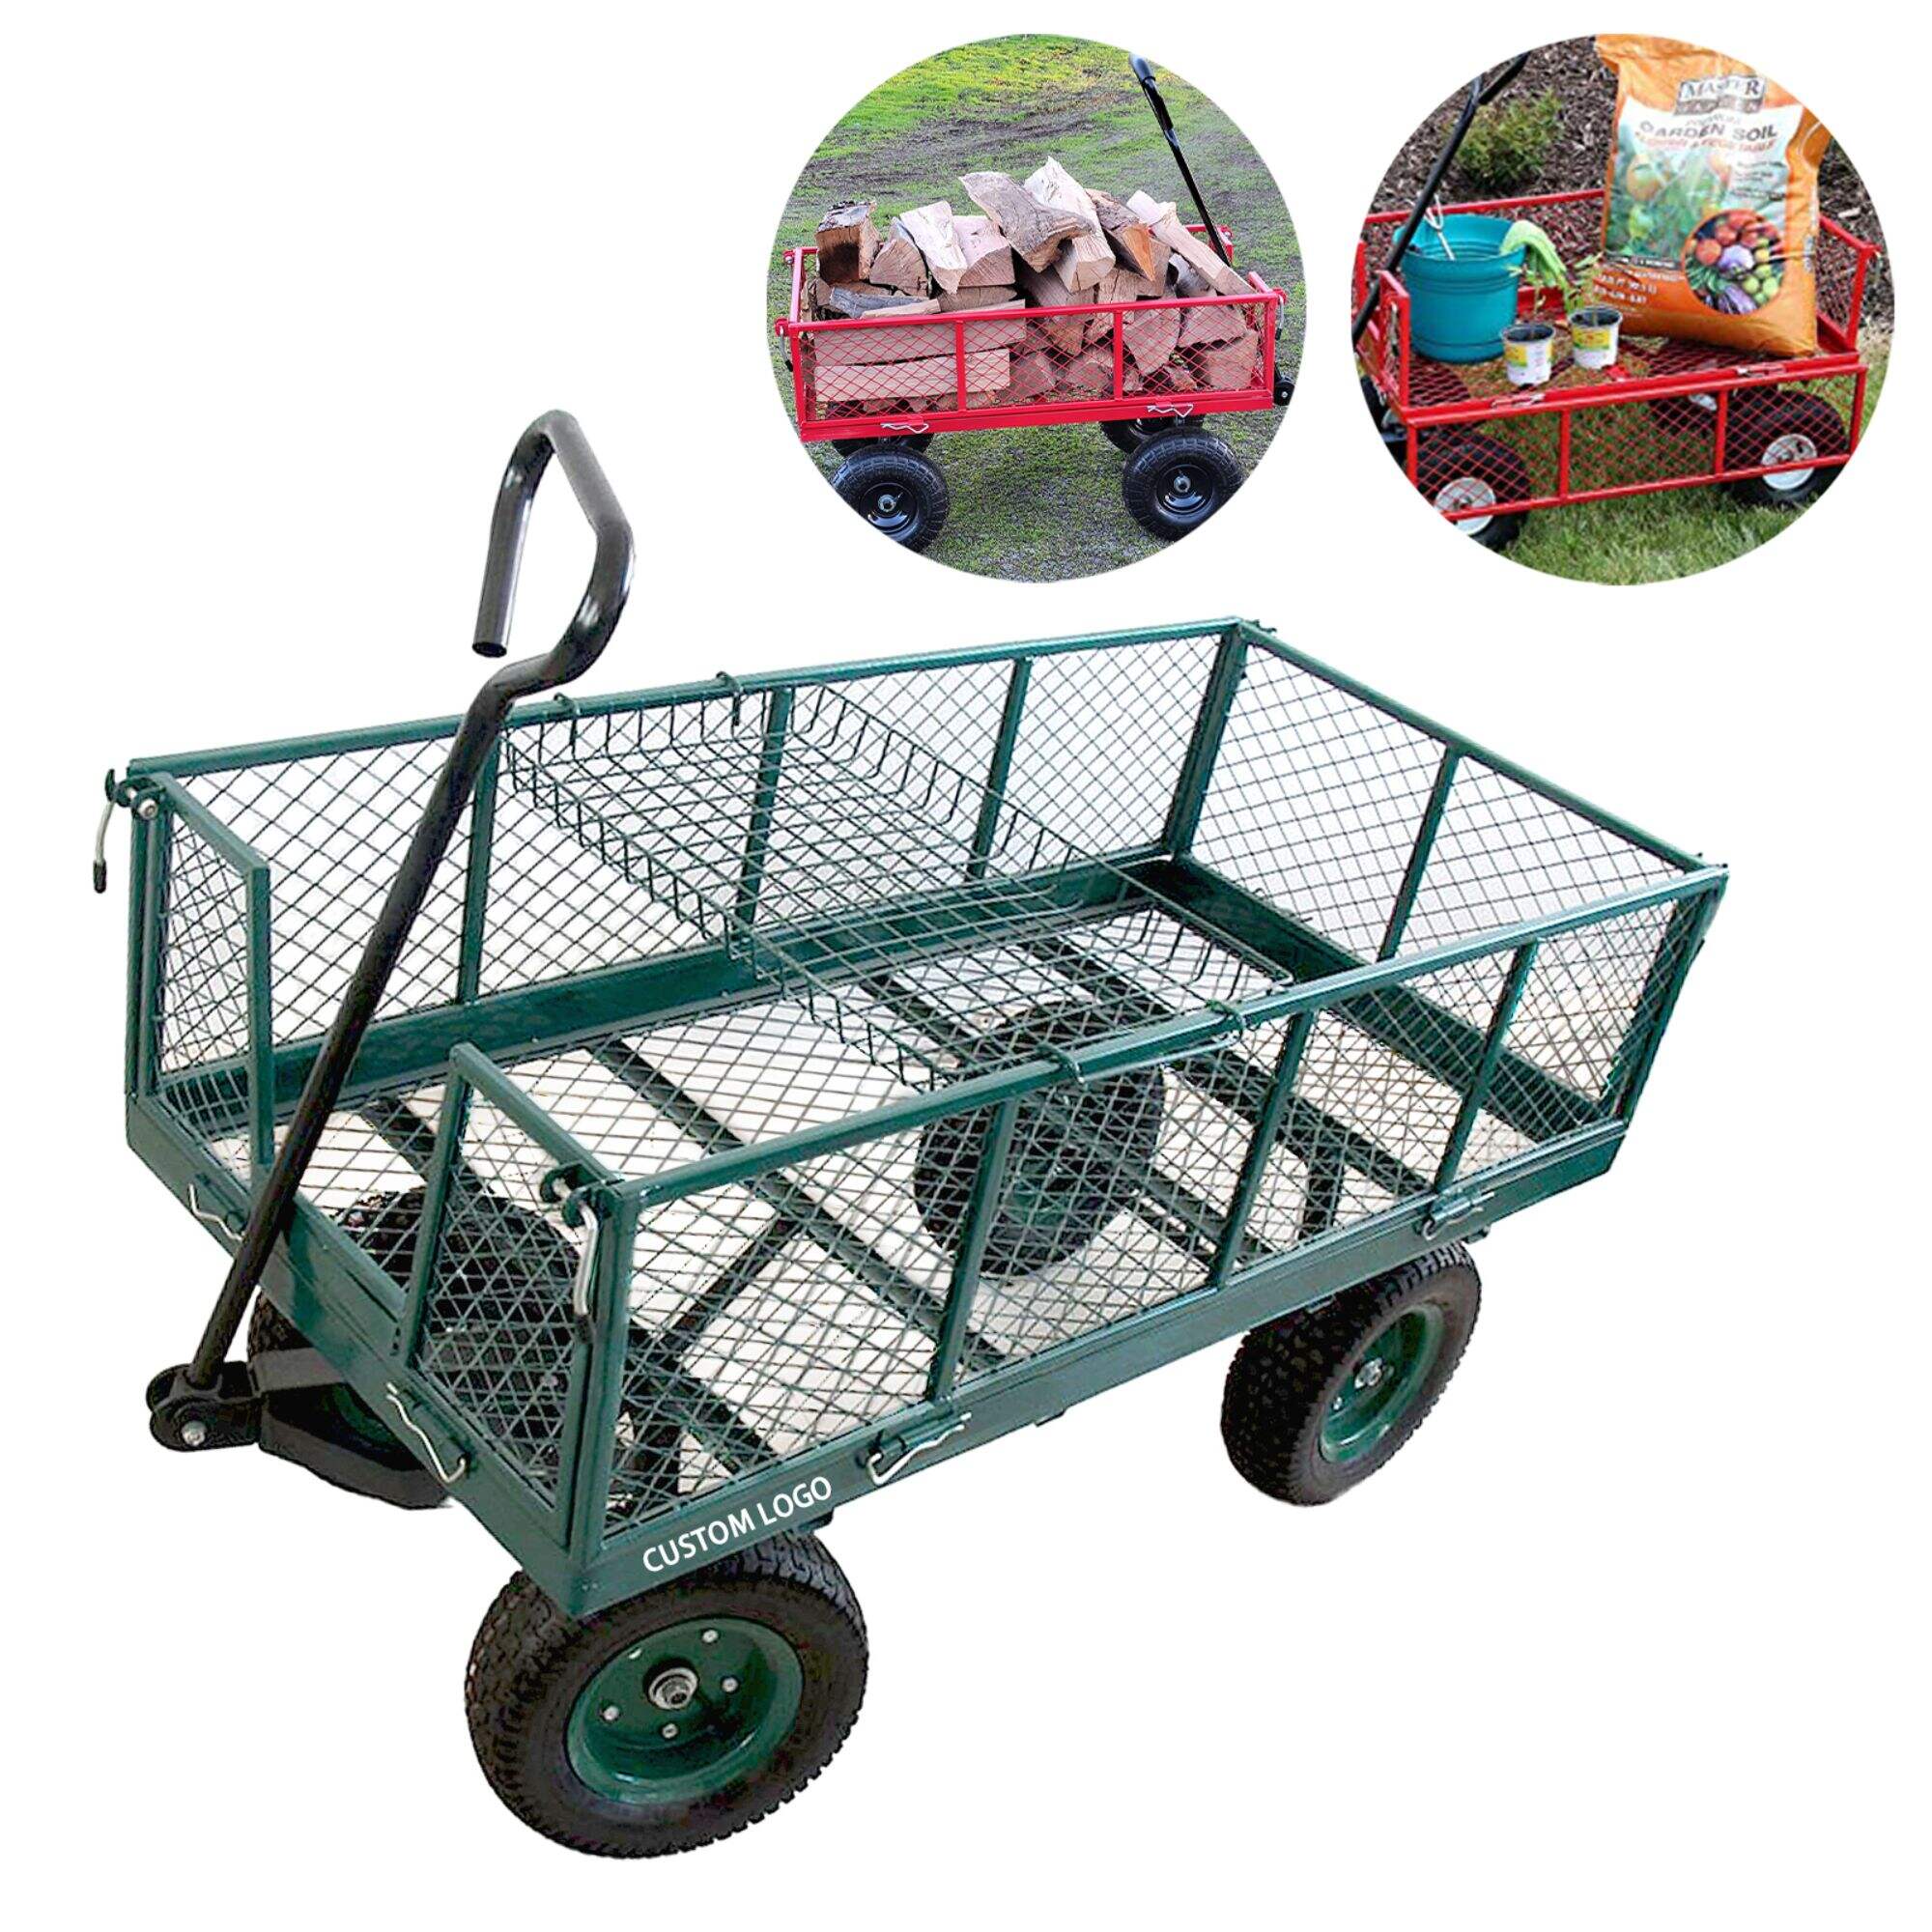 TC1840 Mesh Steel Garden Trolley Cart, Folding Utility Wagon, with Removable Sides, 10 Inch 3.50-4 Pneumatic Wheel, 300KG Capacity